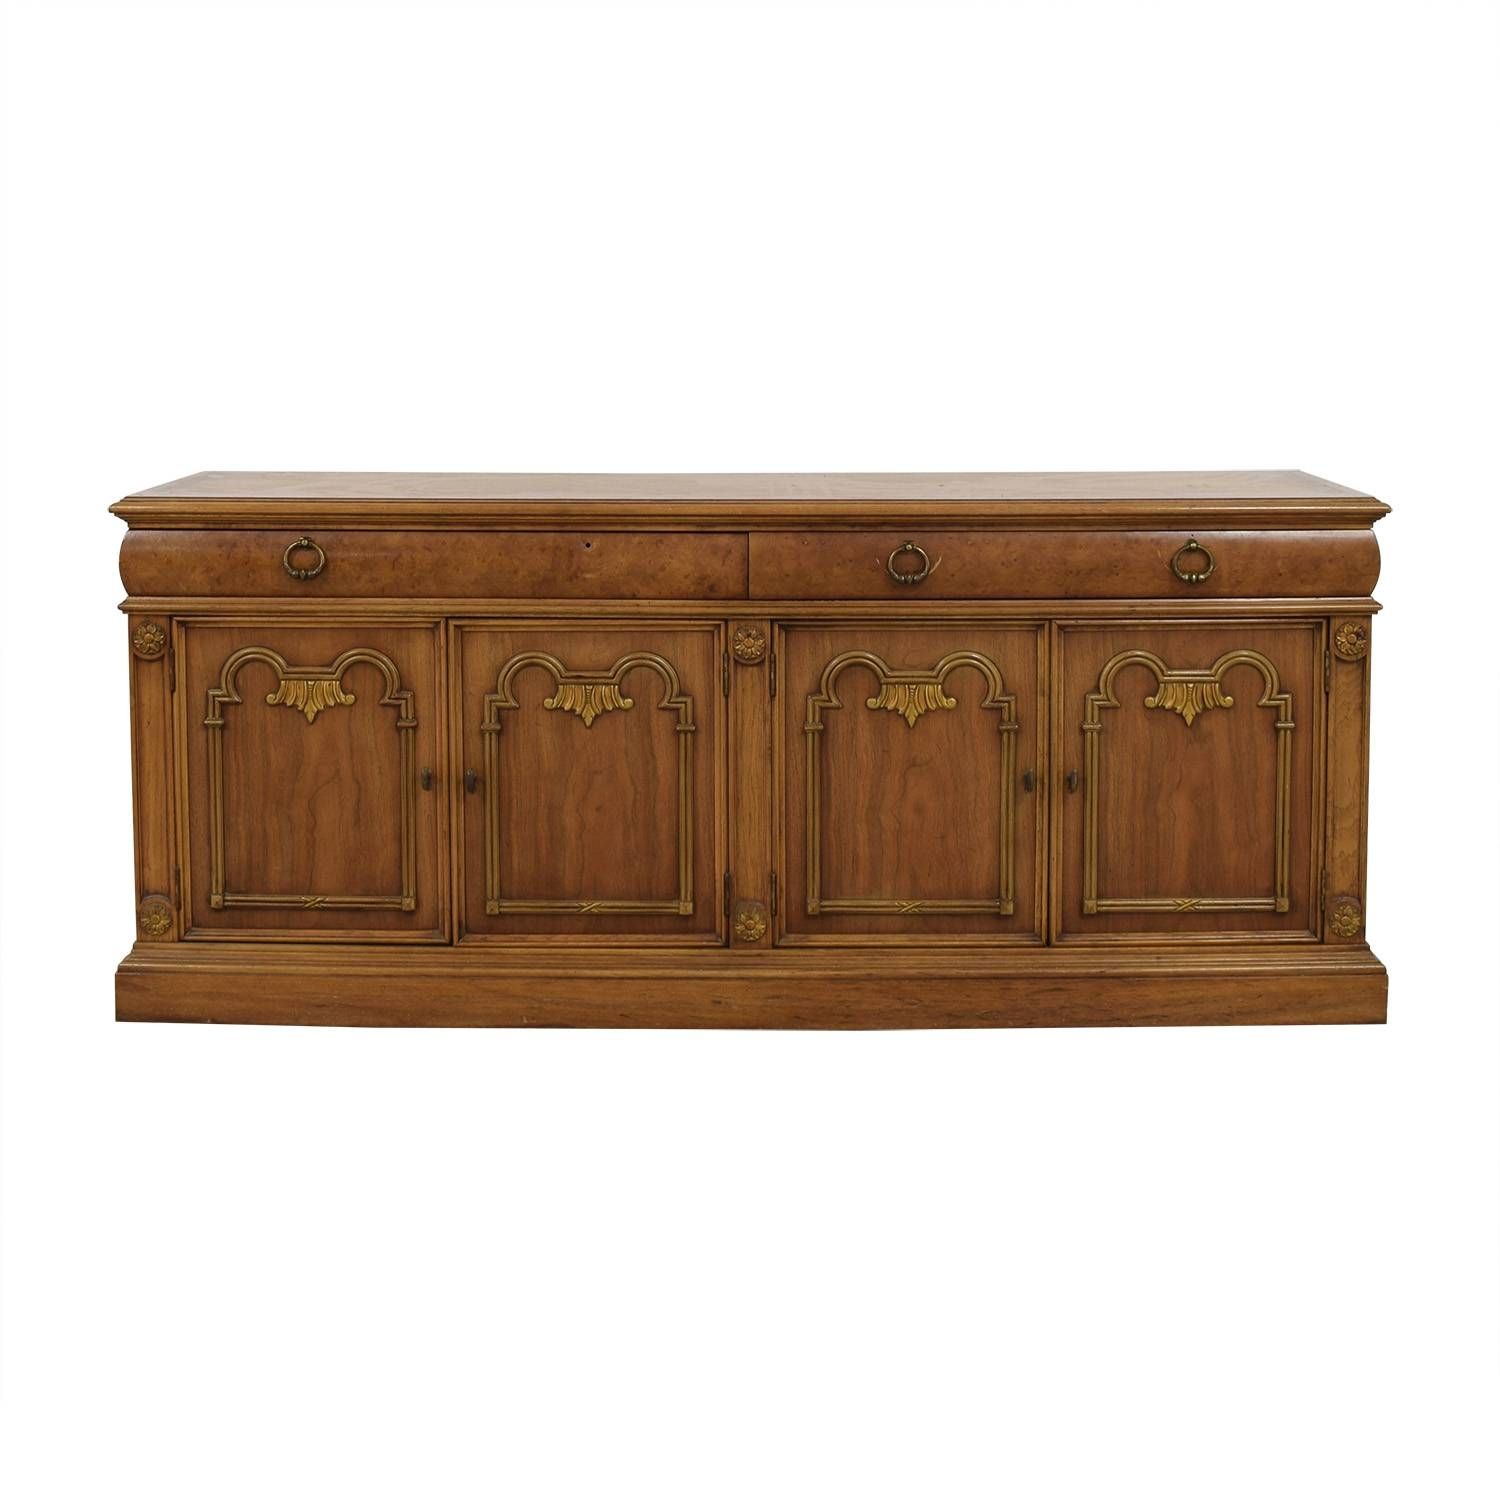 79% Off – Thomasville Thomasville Buffet Storage Cabinet / Storage Pertaining To Most Popular Thomasville Sideboards (View 3 of 15)